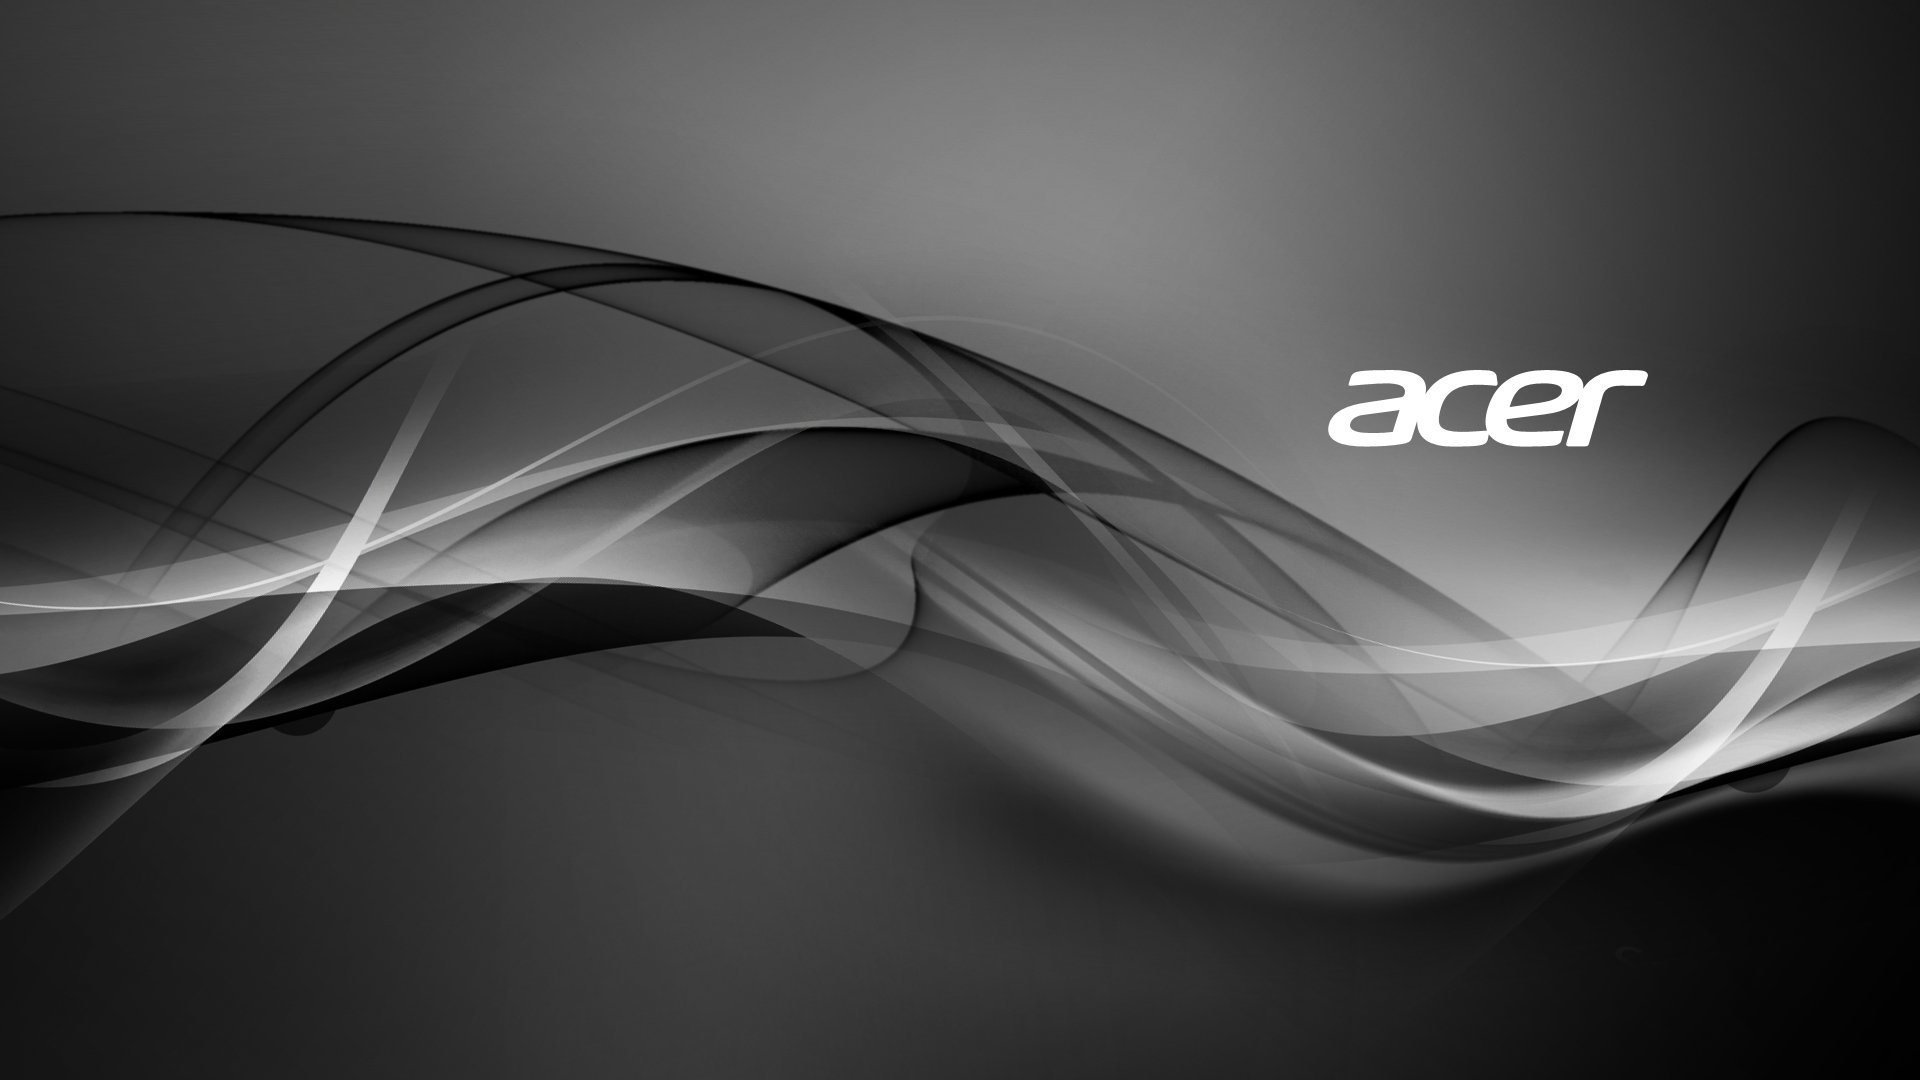 Acer 1366x768